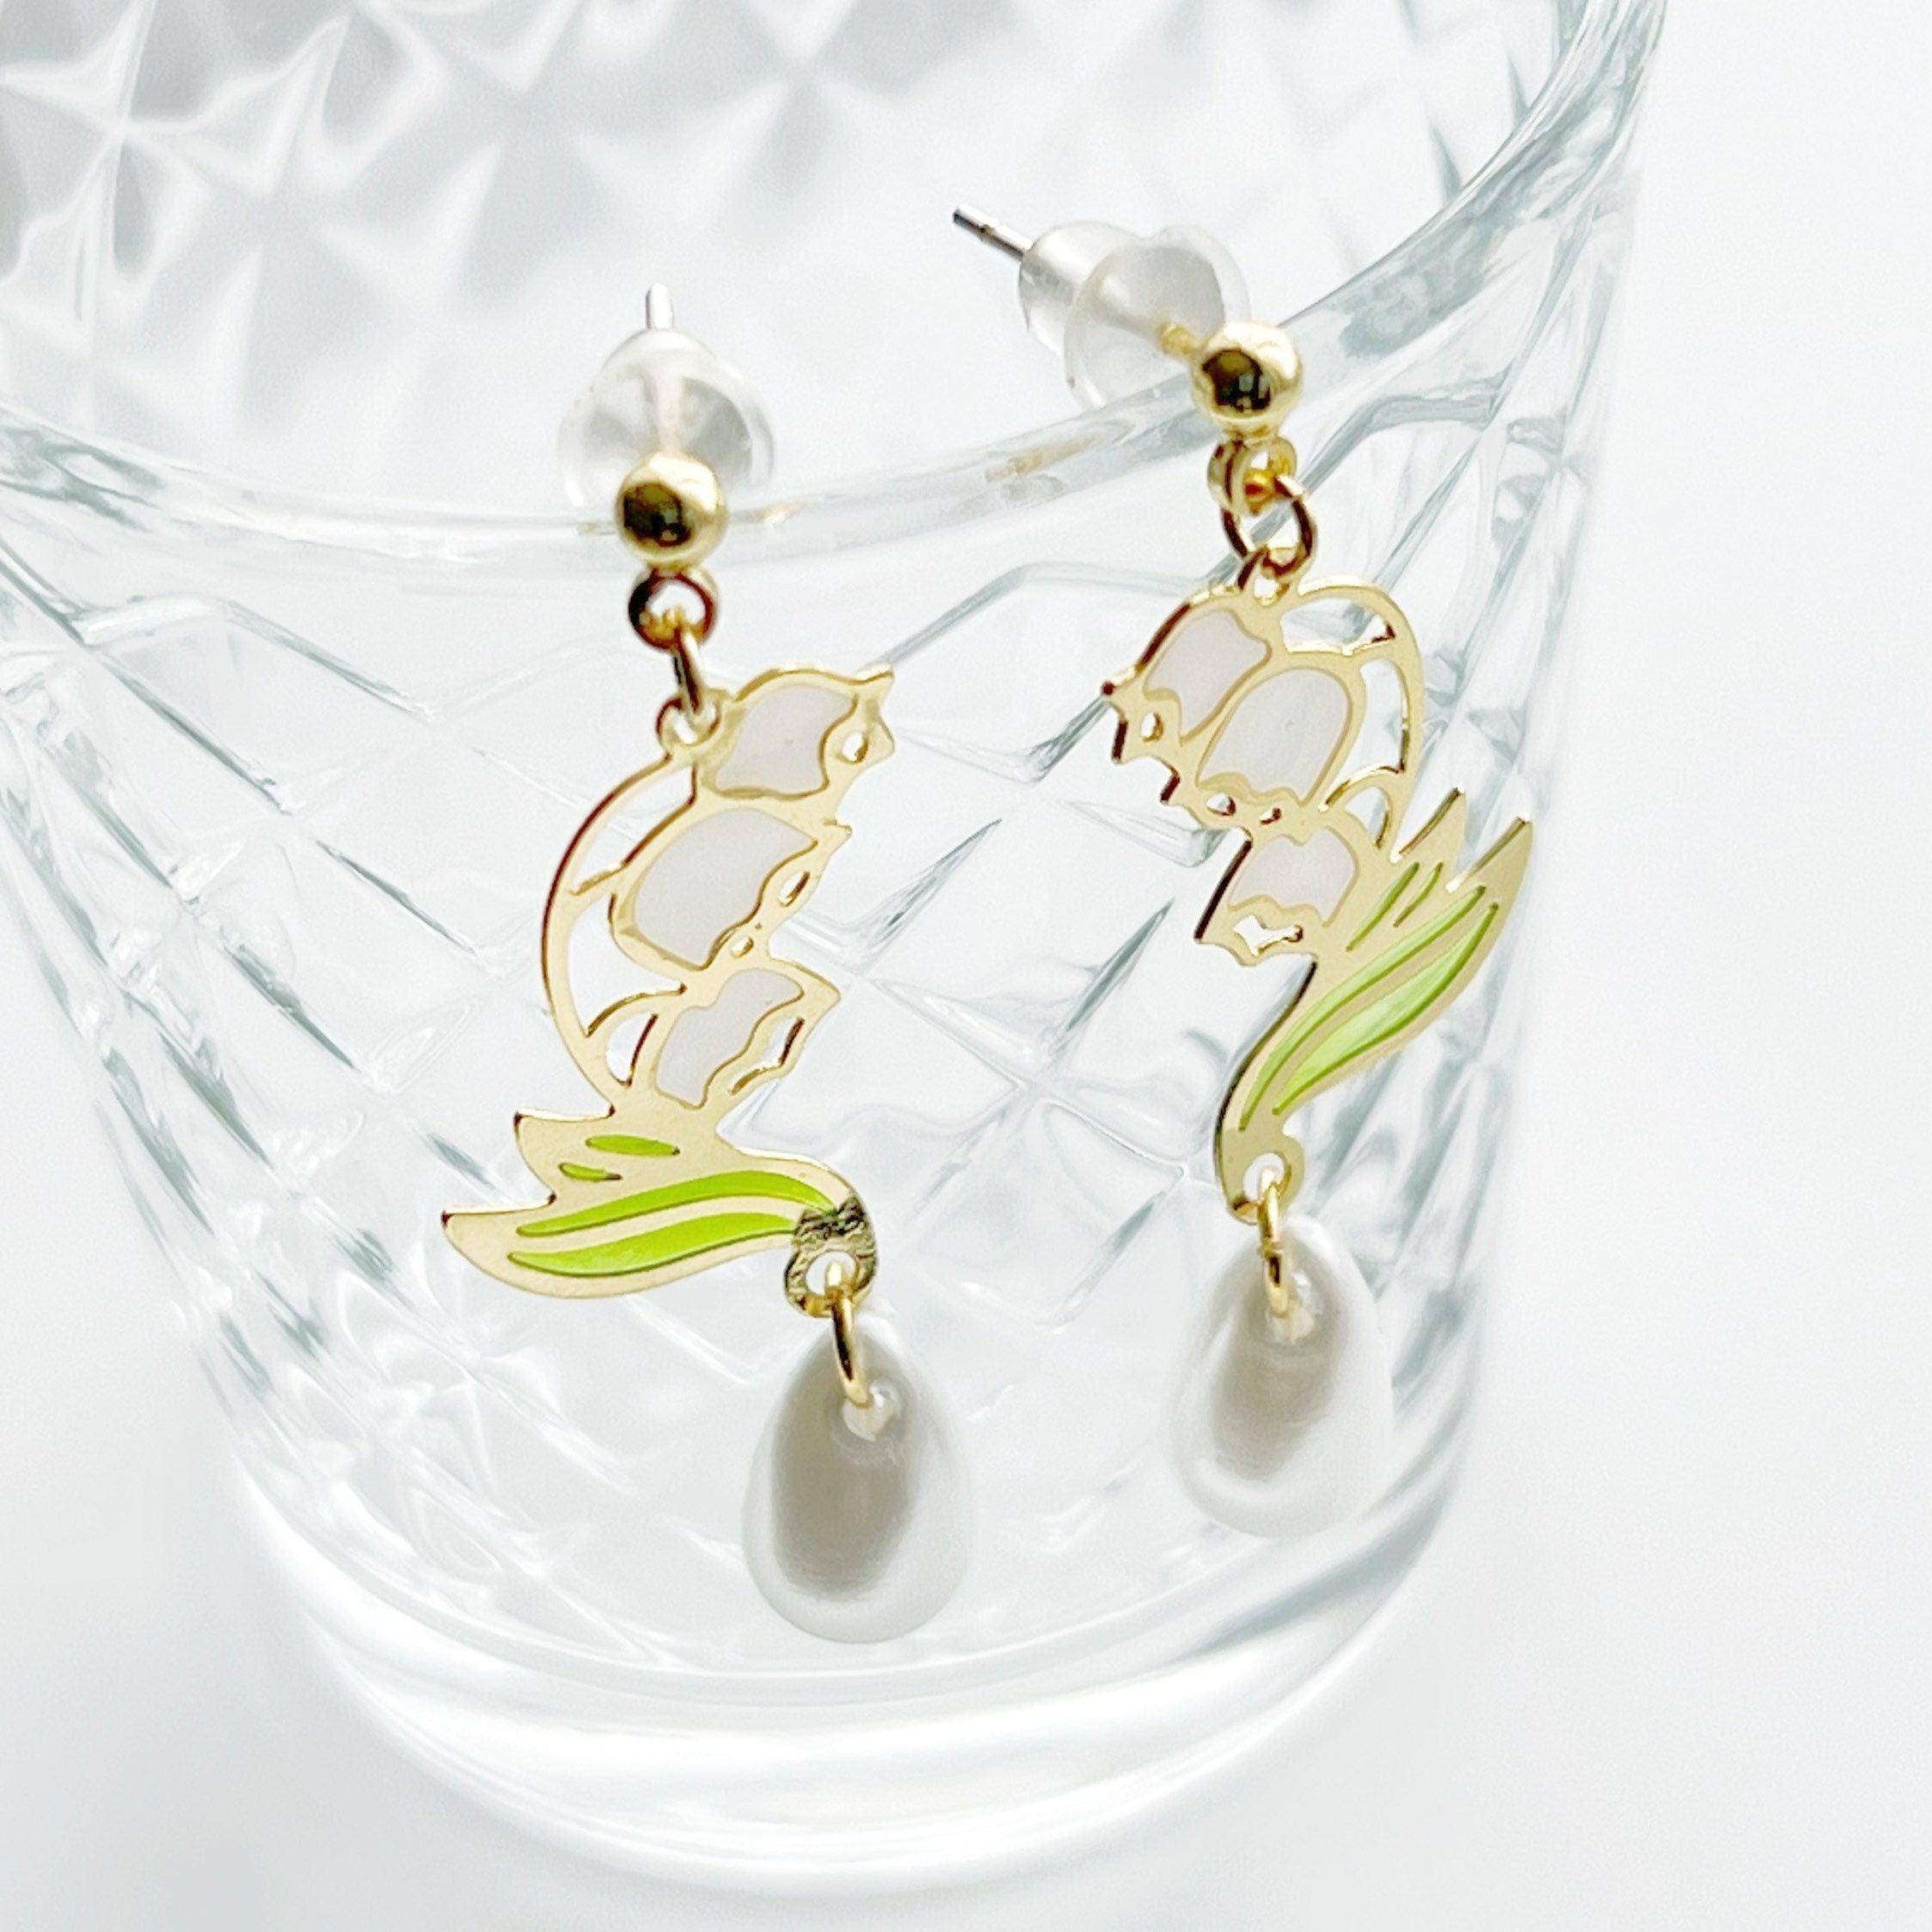 Lily of the Valley Earrings - White Bell Shape Flower Drop Earrings - Jewelry & Watches - Bijou Her -  -  - 